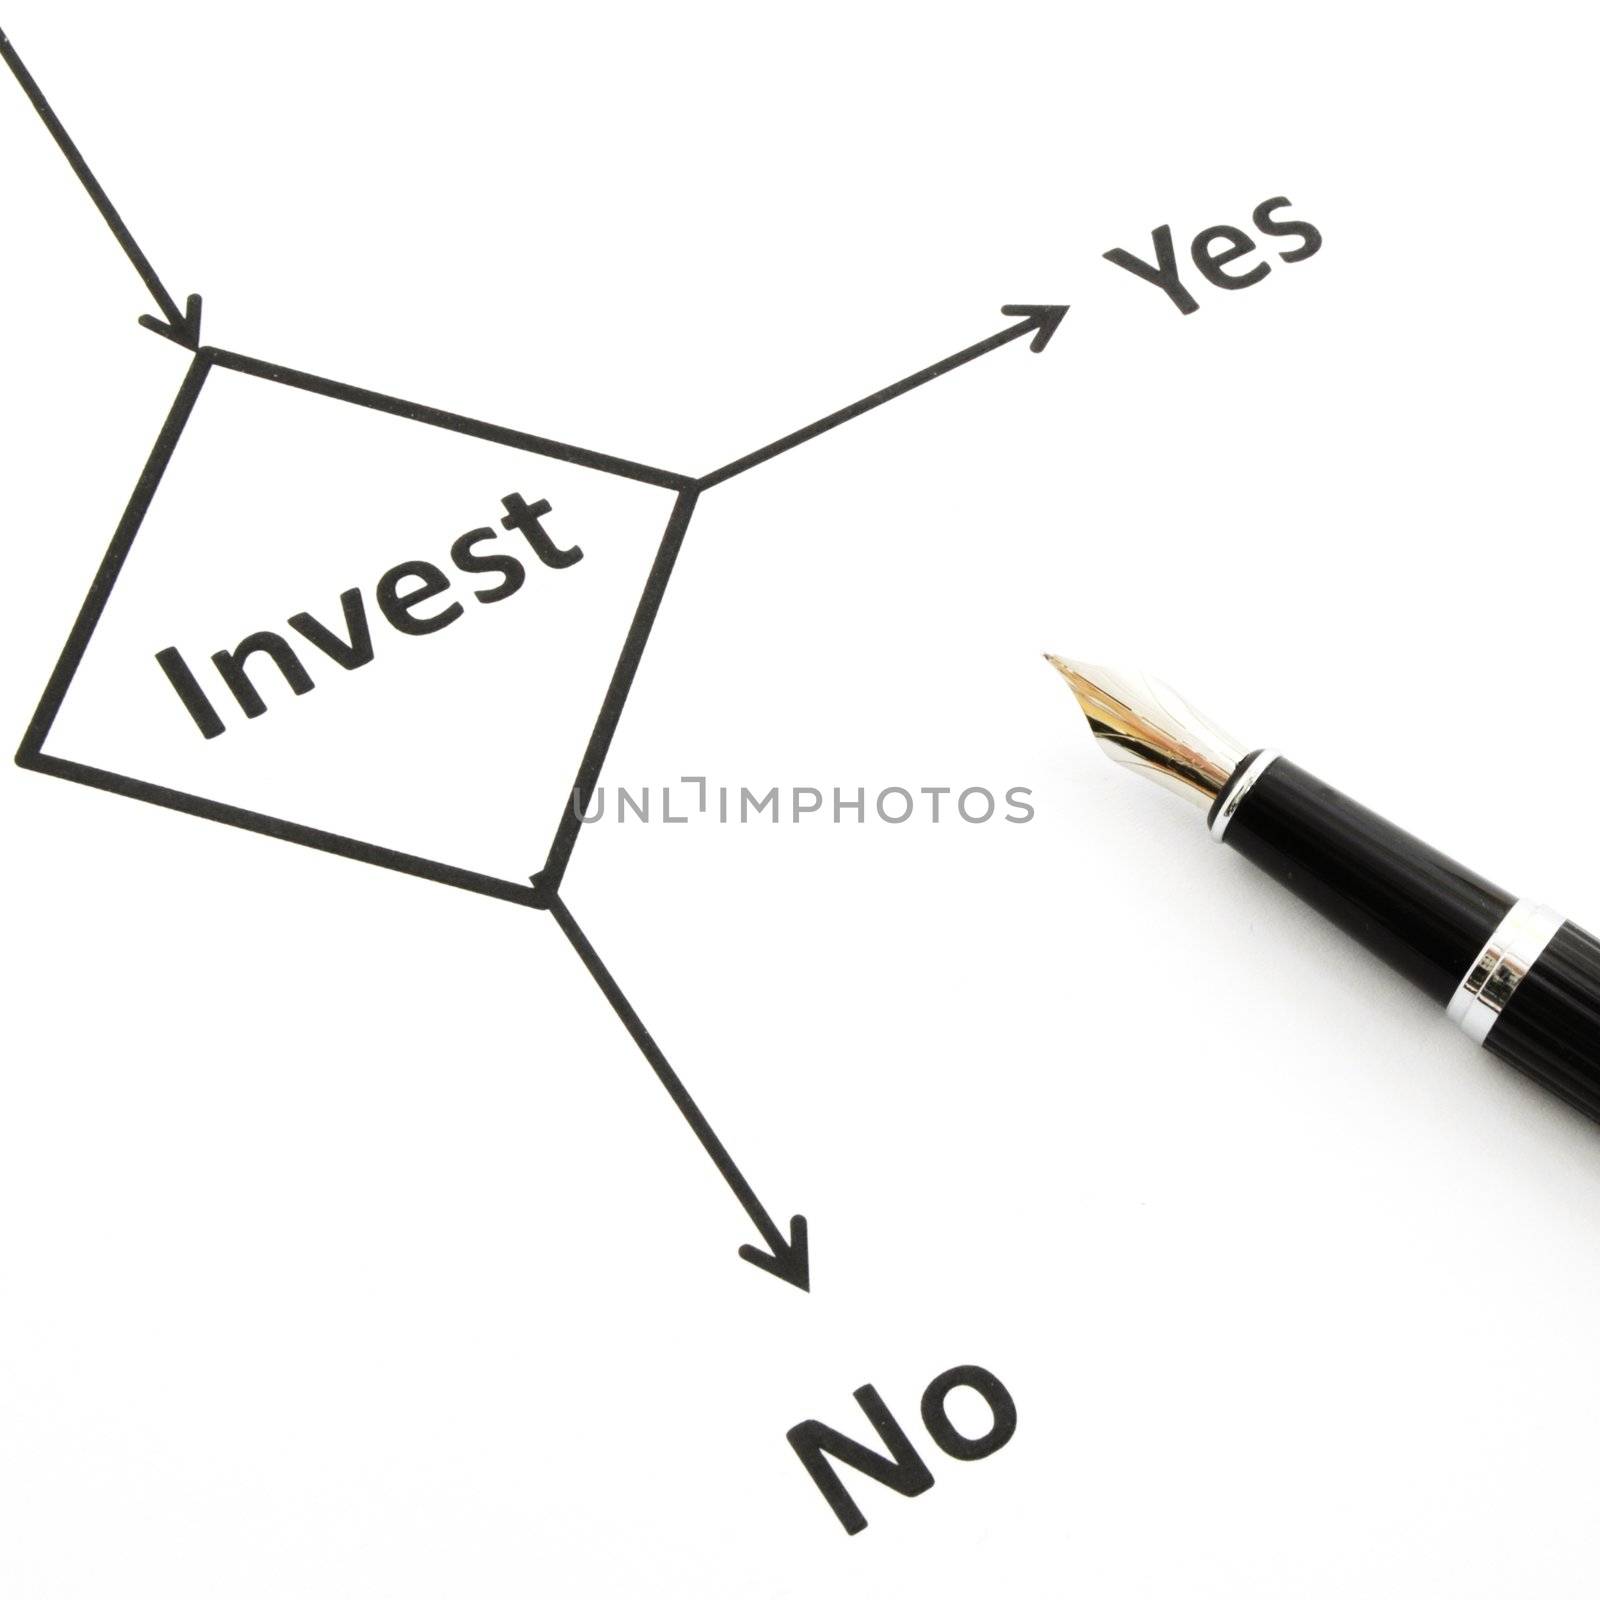 investment and flowchart showing business or finance concept